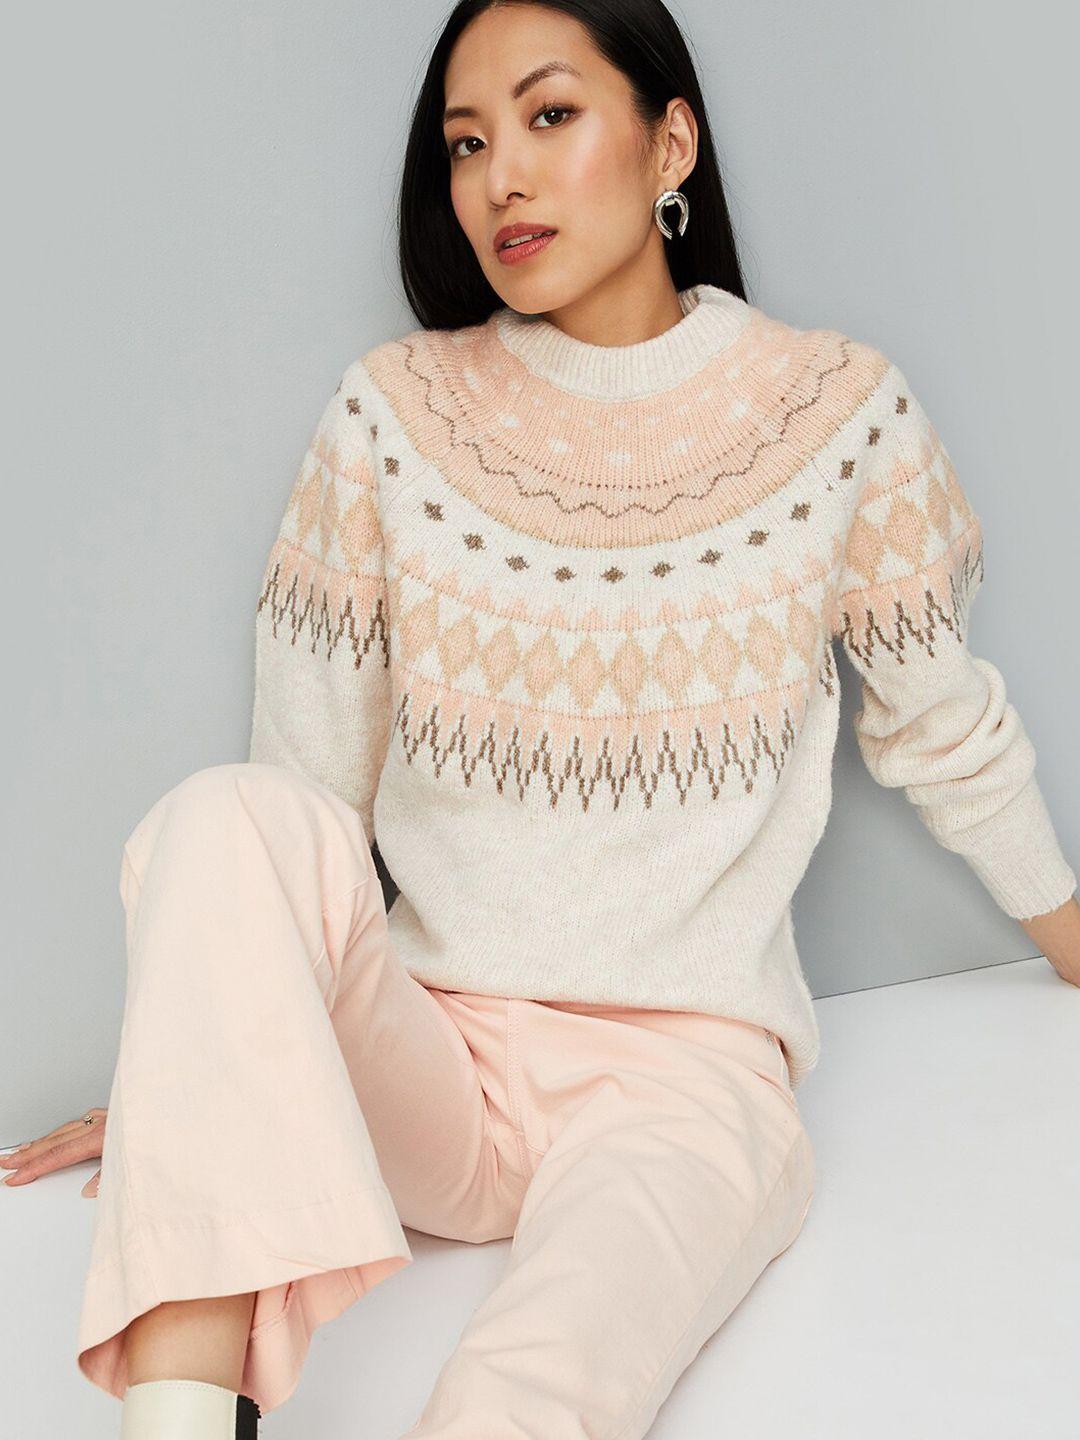 max ethnic motifs printed pullover sweater